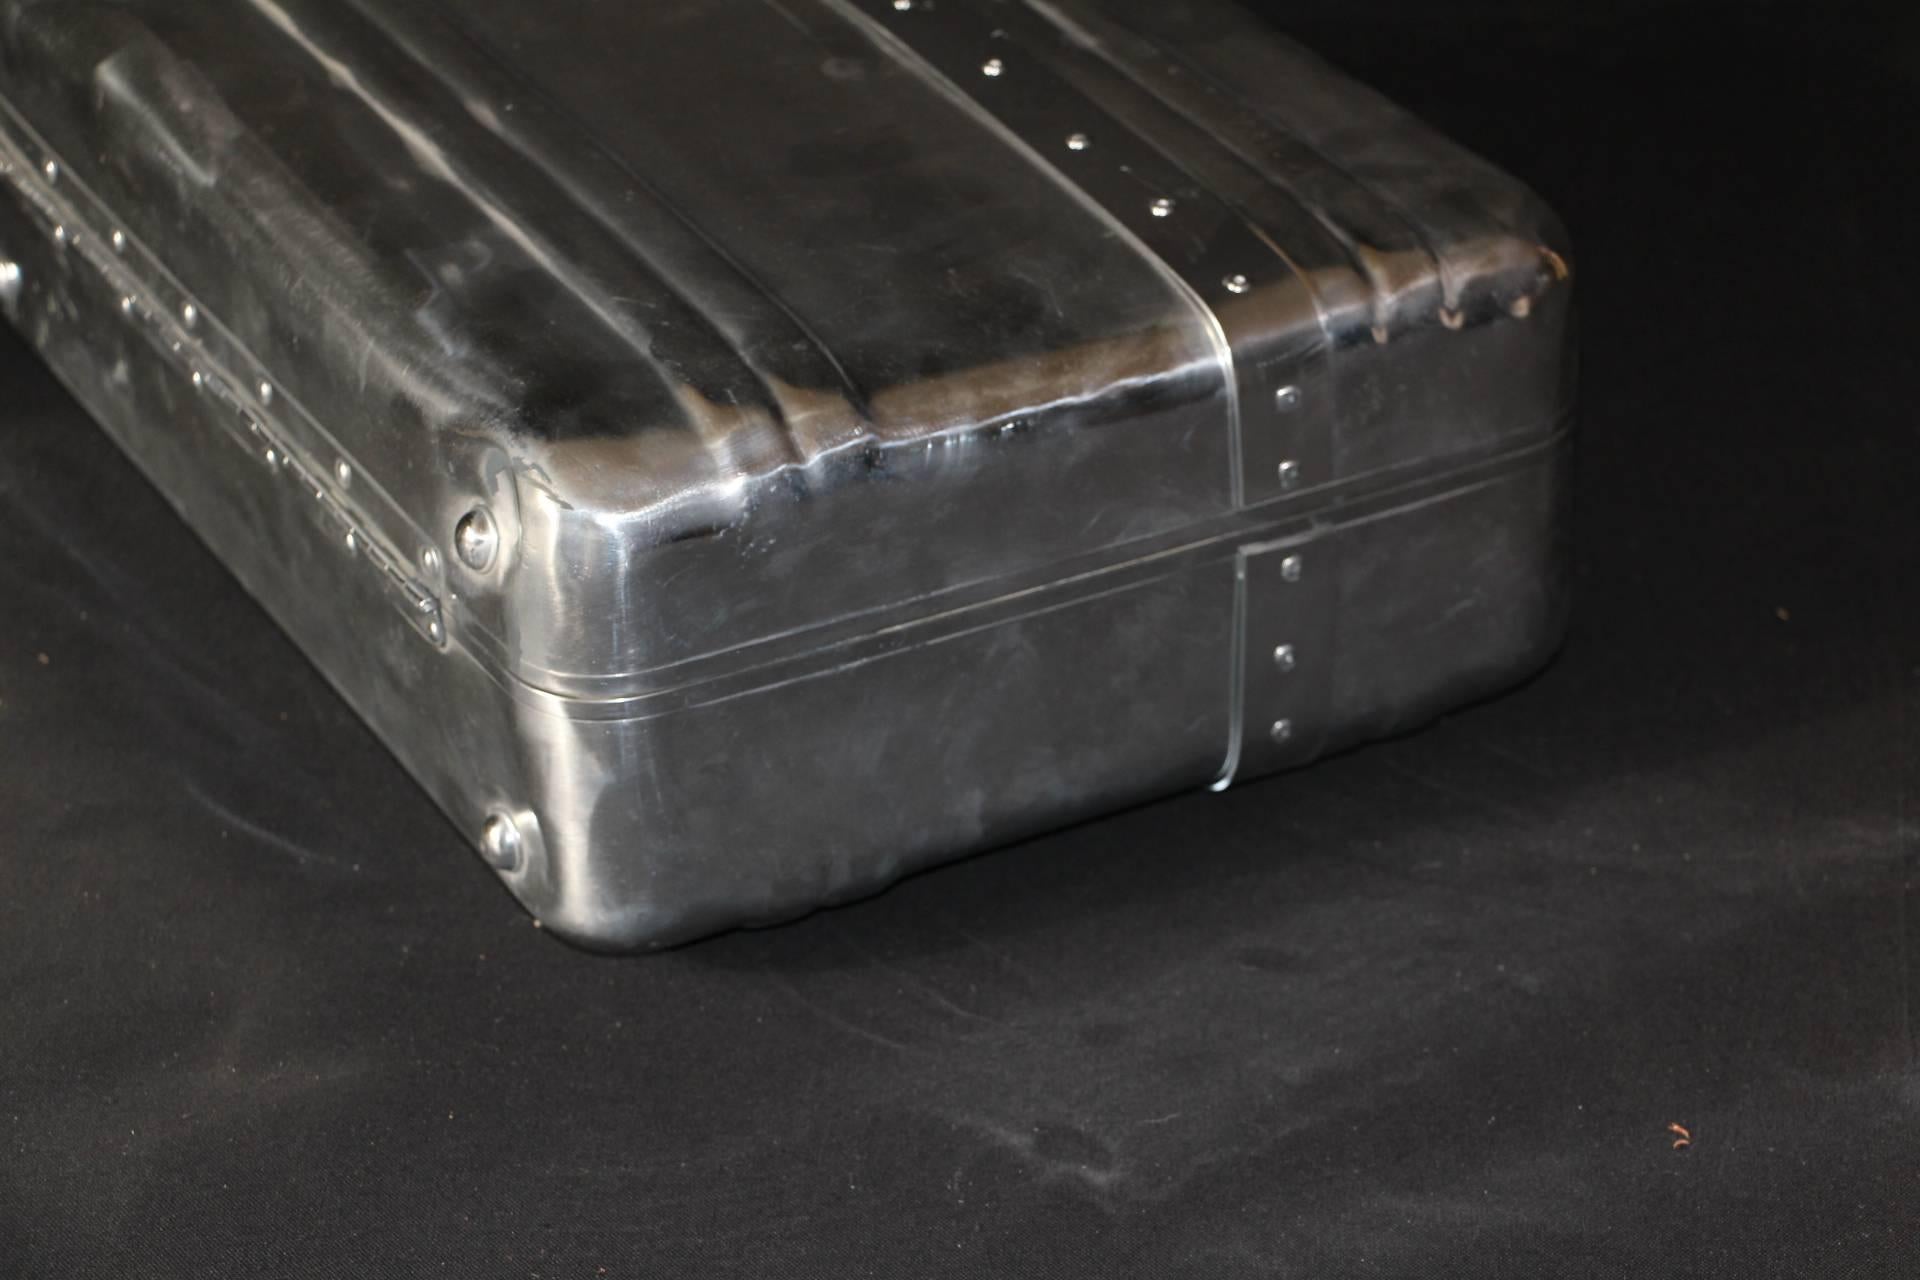 This mirror polished aluminum suitcase is excellent for visual effect and can be used as a piece for decoration in a high end interior.
It can also be perfect for travel.
Clean inside.
We have several of them in very good condition too and we can